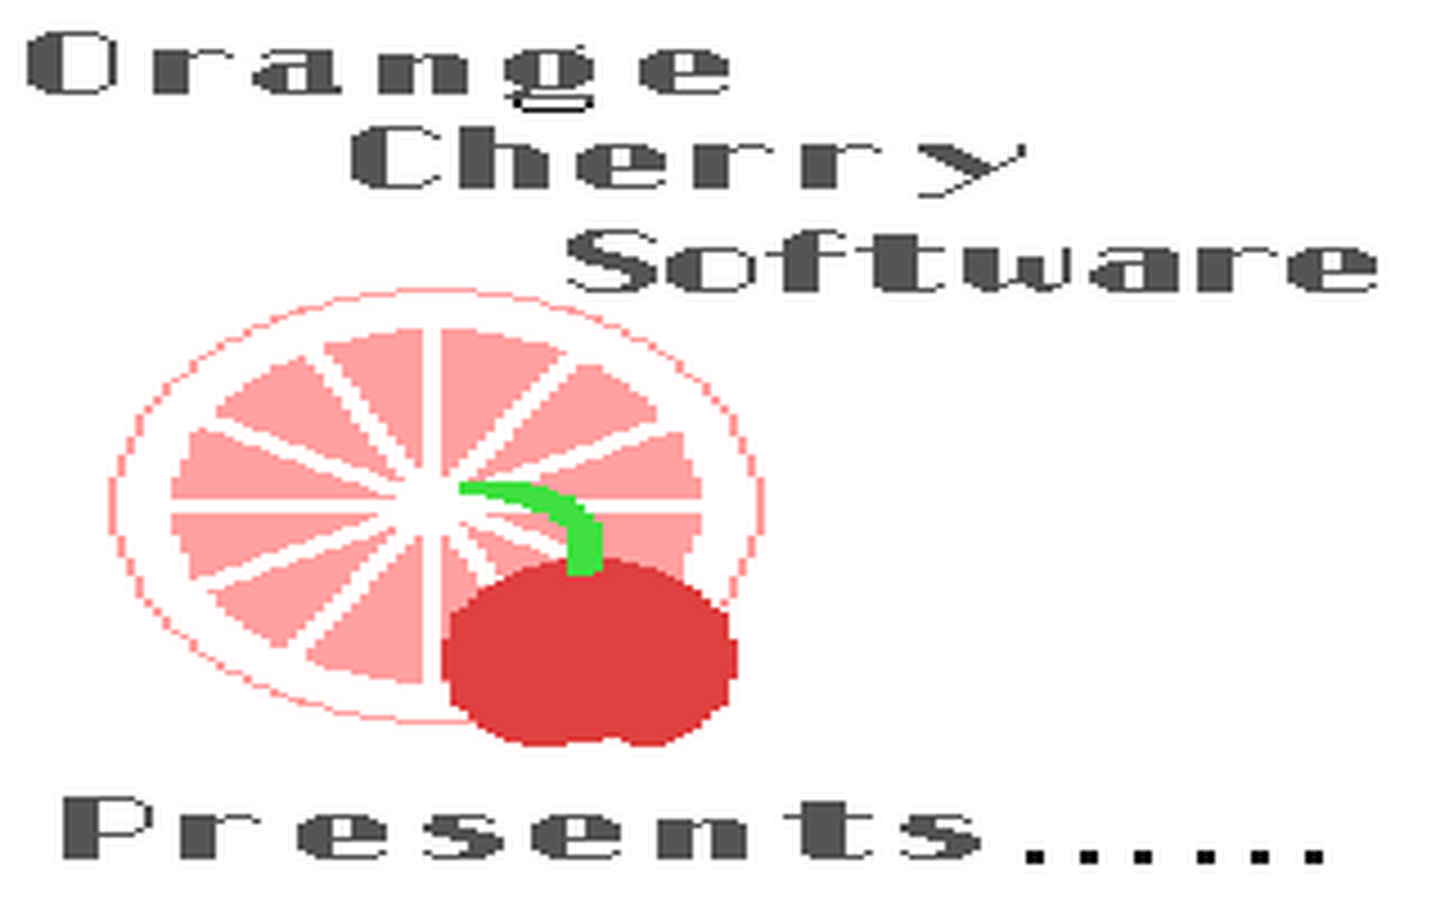 C64 GameBase All_About_Dinosaurs Orange_Cherry_Software 1984